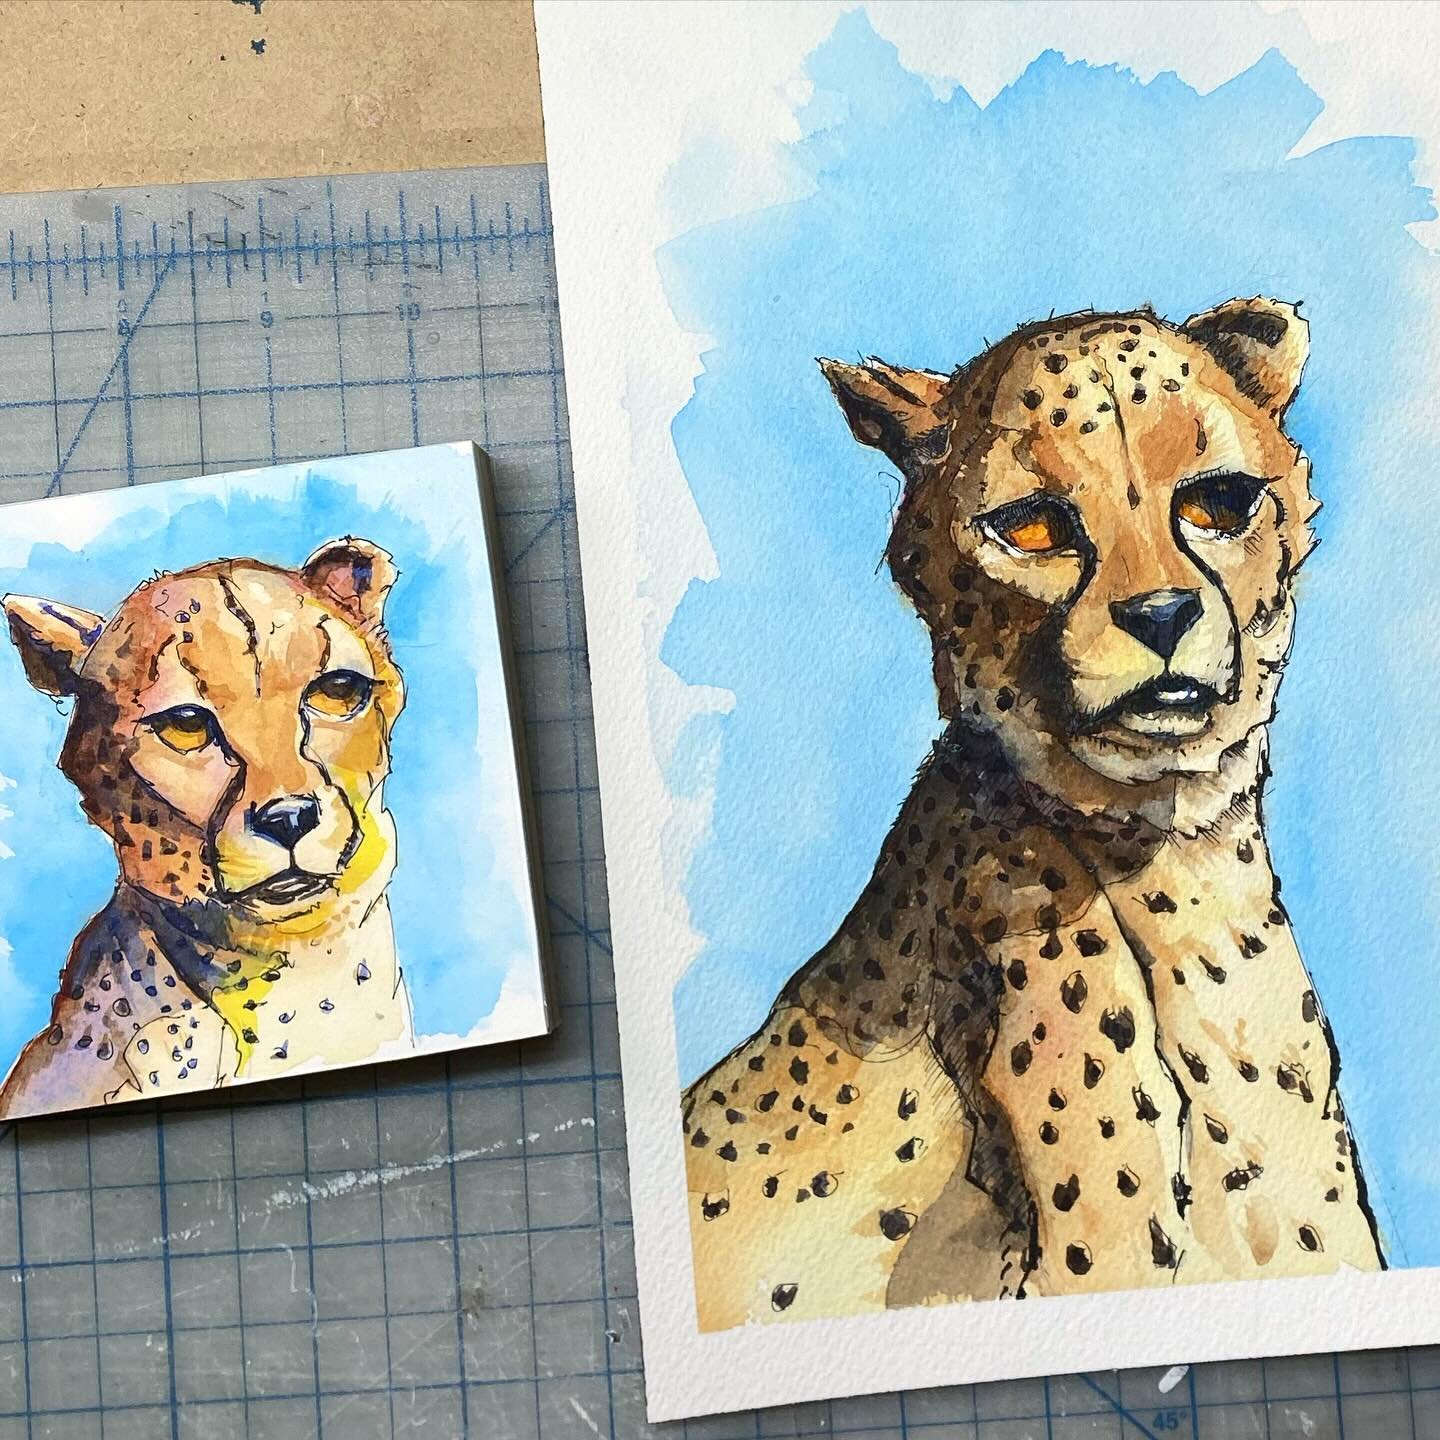 A cheetah and a cheetah. Both painted on instgram Live&rsquo;s today. The bigger one at 9am and the tiny square one at 9pm. Next time I&rsquo;m on live, I&rsquo;ll plan it ahead and schedule it so you can tune in. 

I&rsquo;m on the alphabet animal k